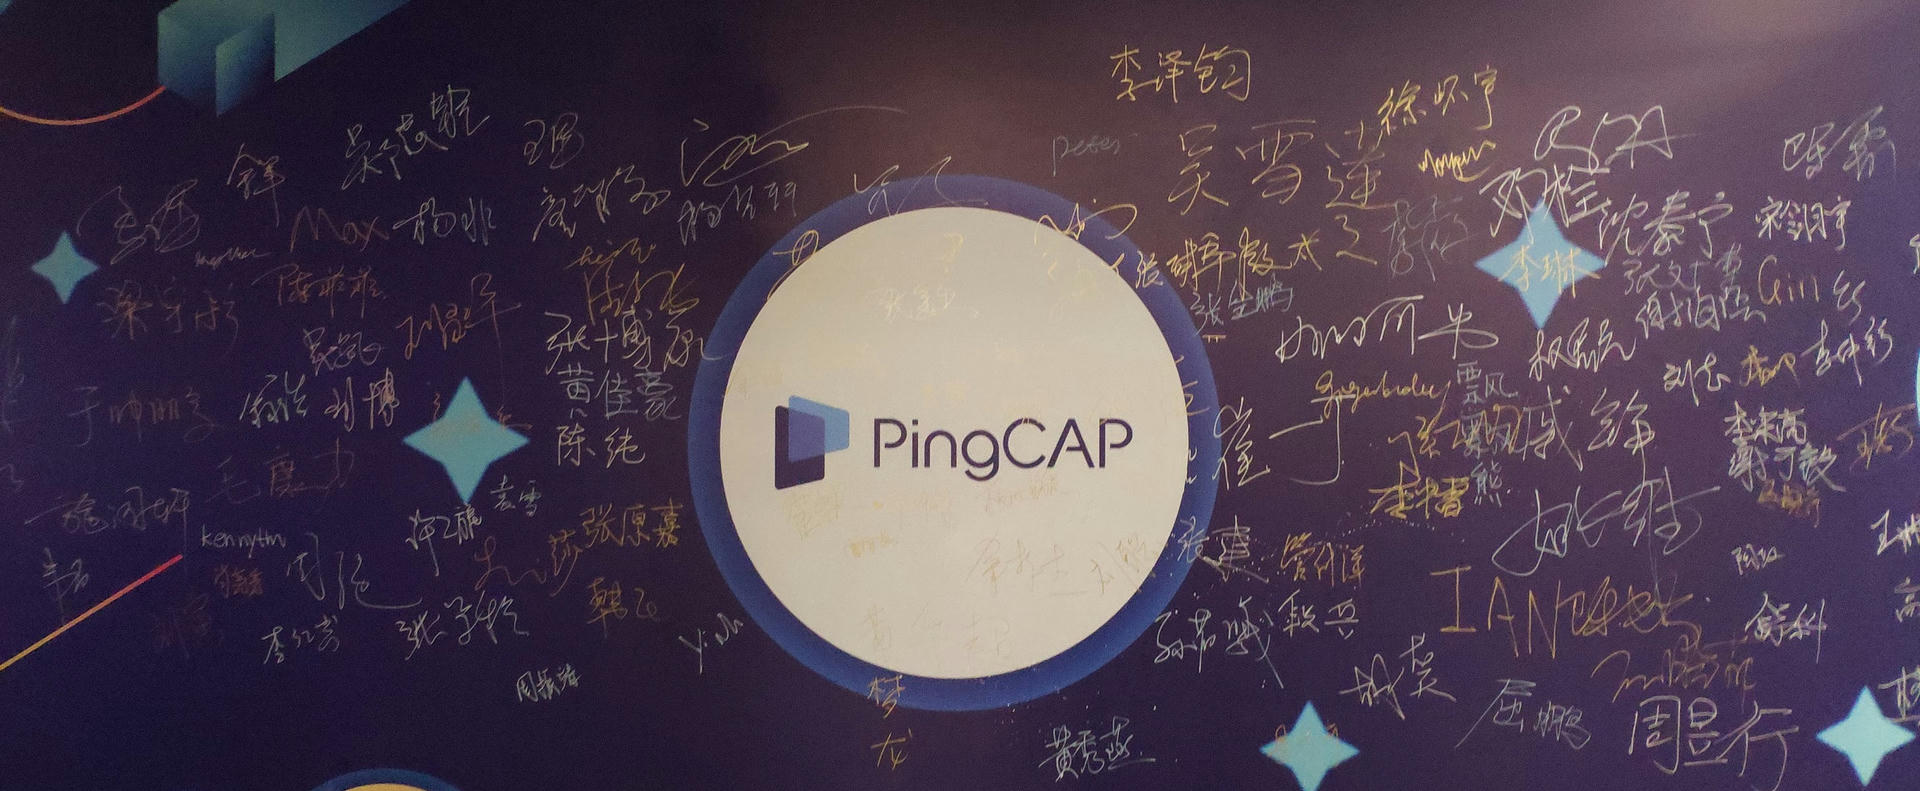 PingCAP Annual party, 2019